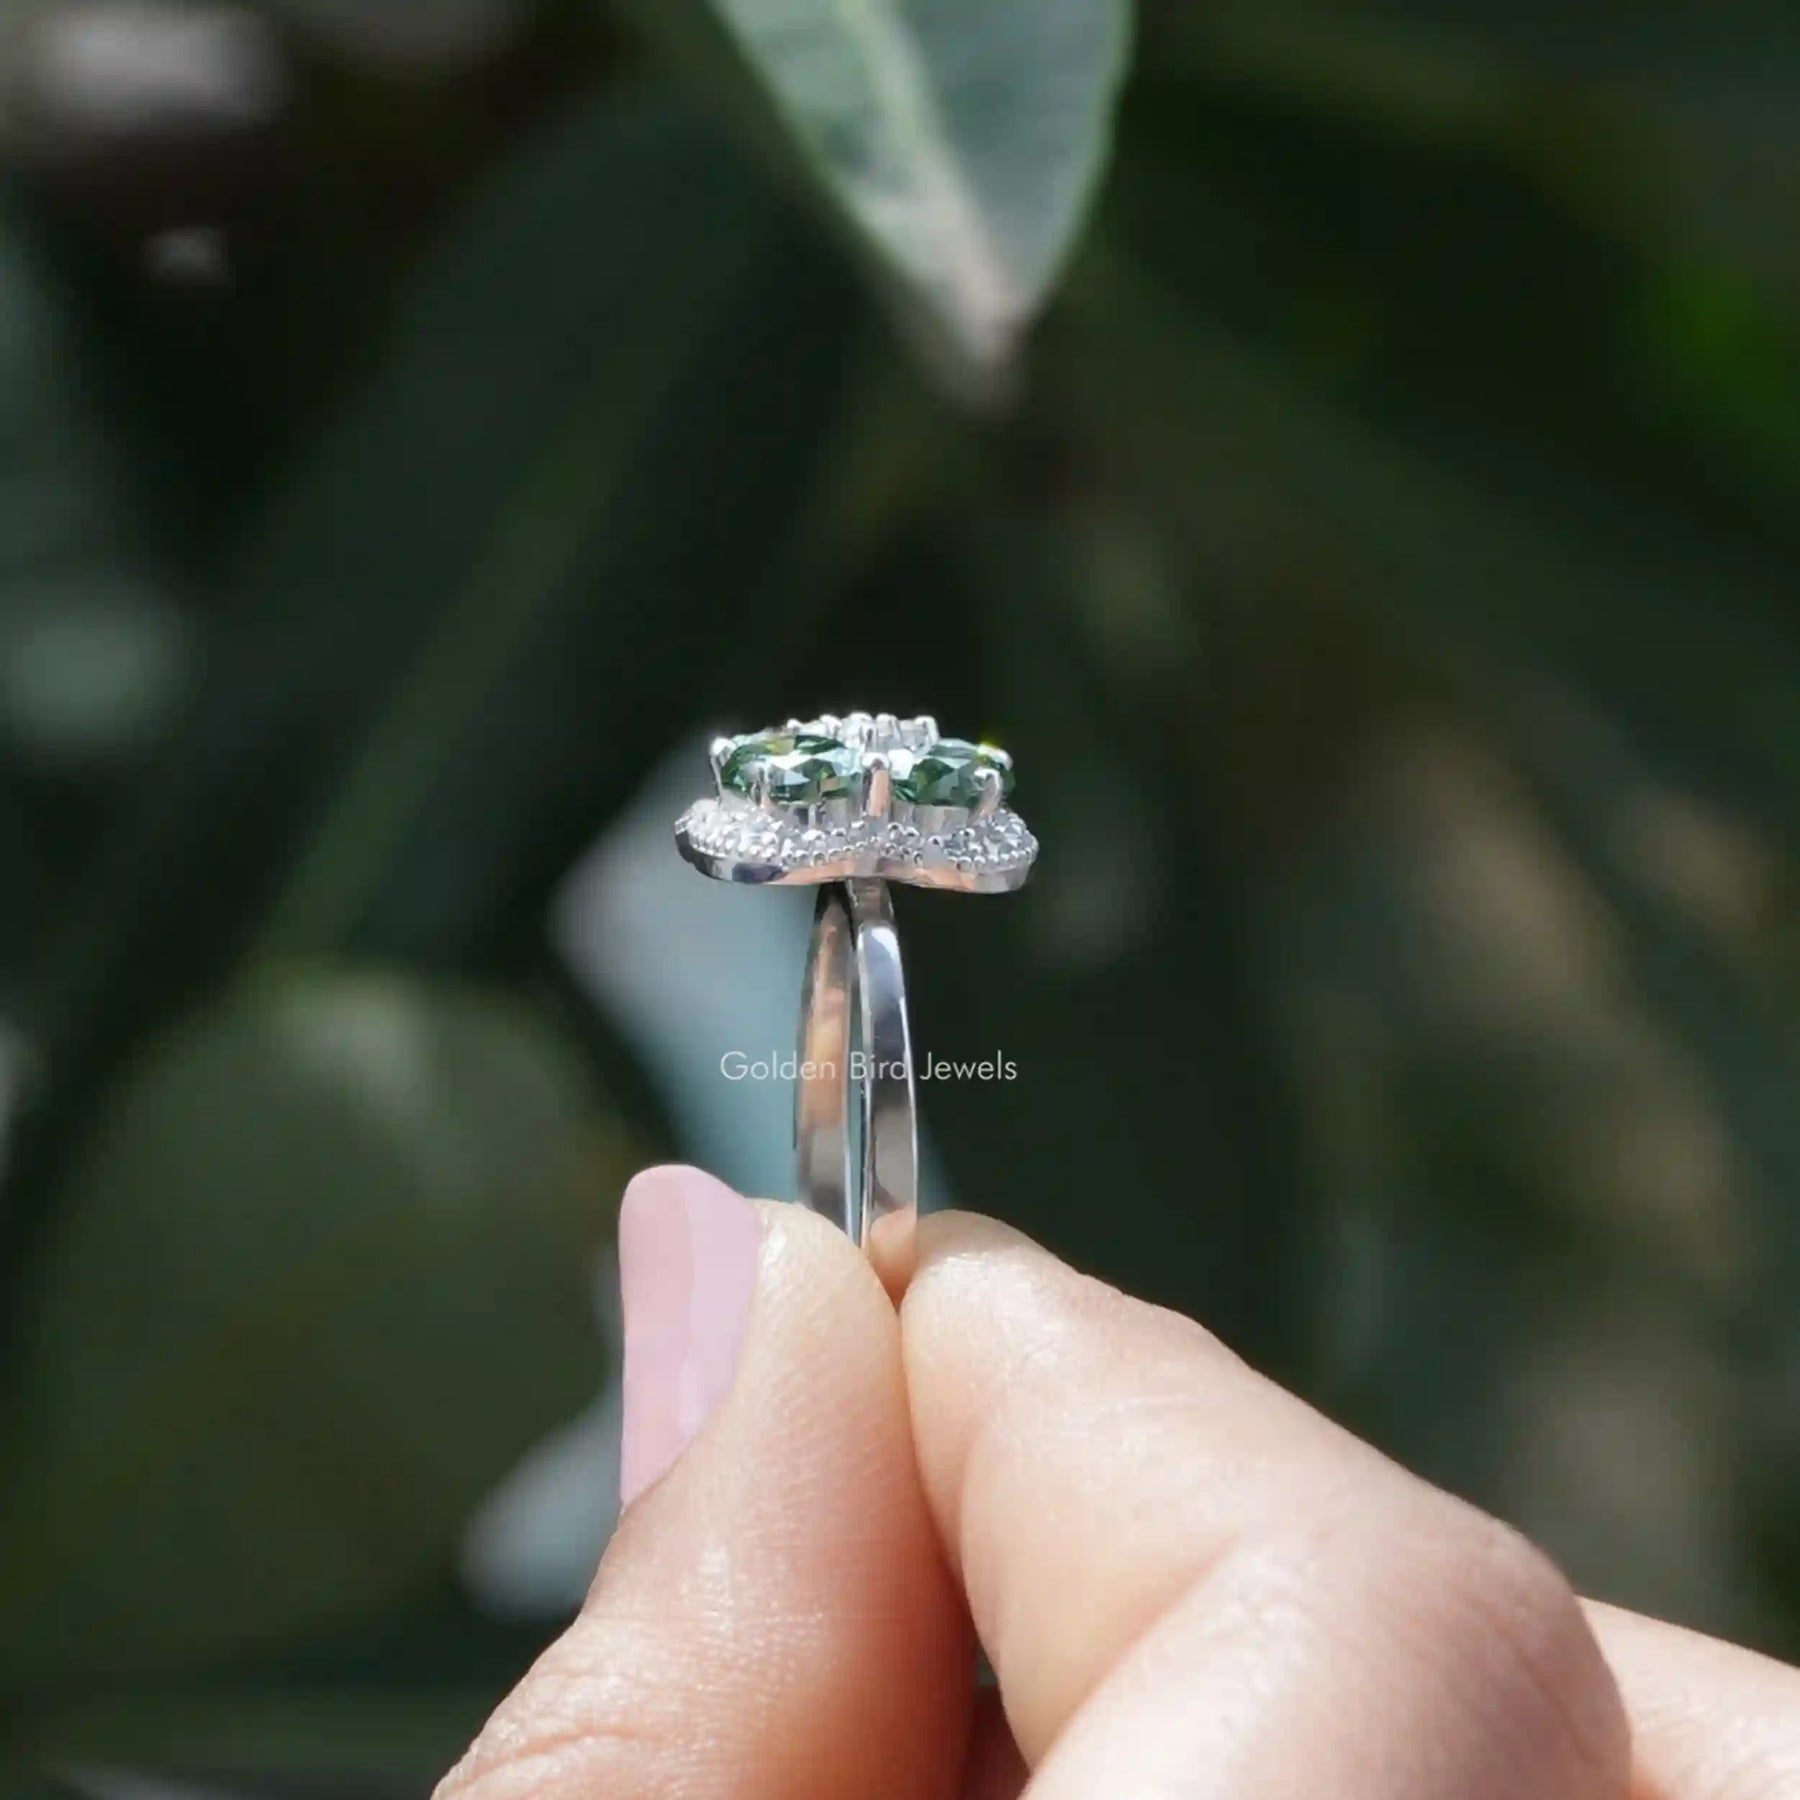 [Side view of oval cut halo moissanite engagement ring]-[Golden Bird Jewels]